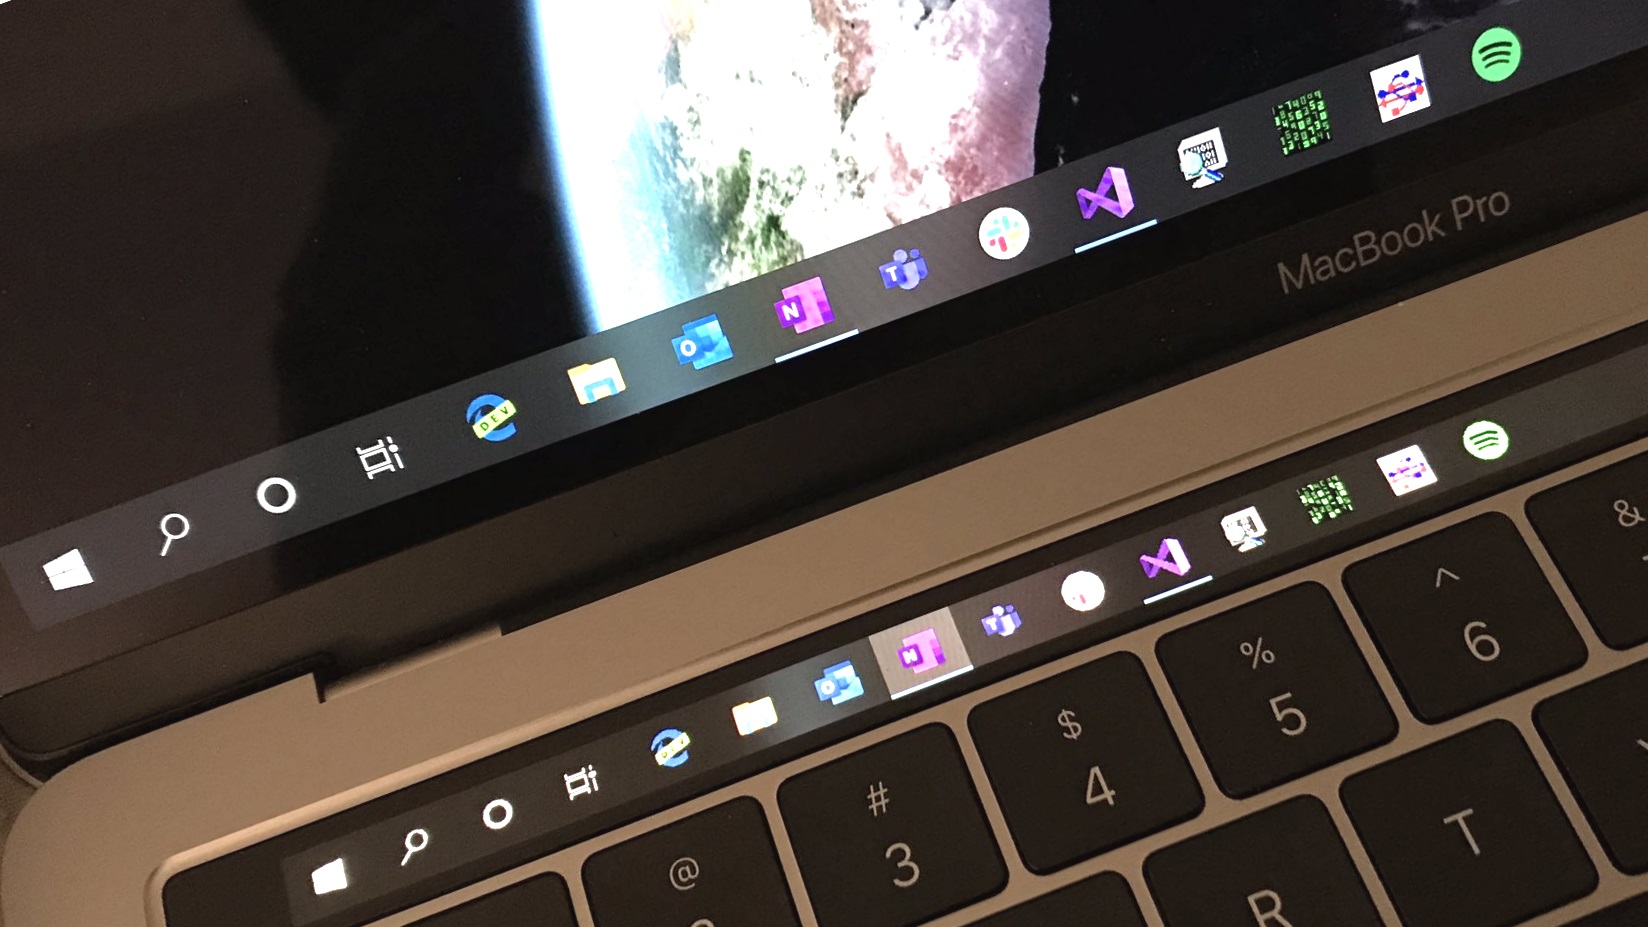 macbook pro early 2013 windows 10 drivers download